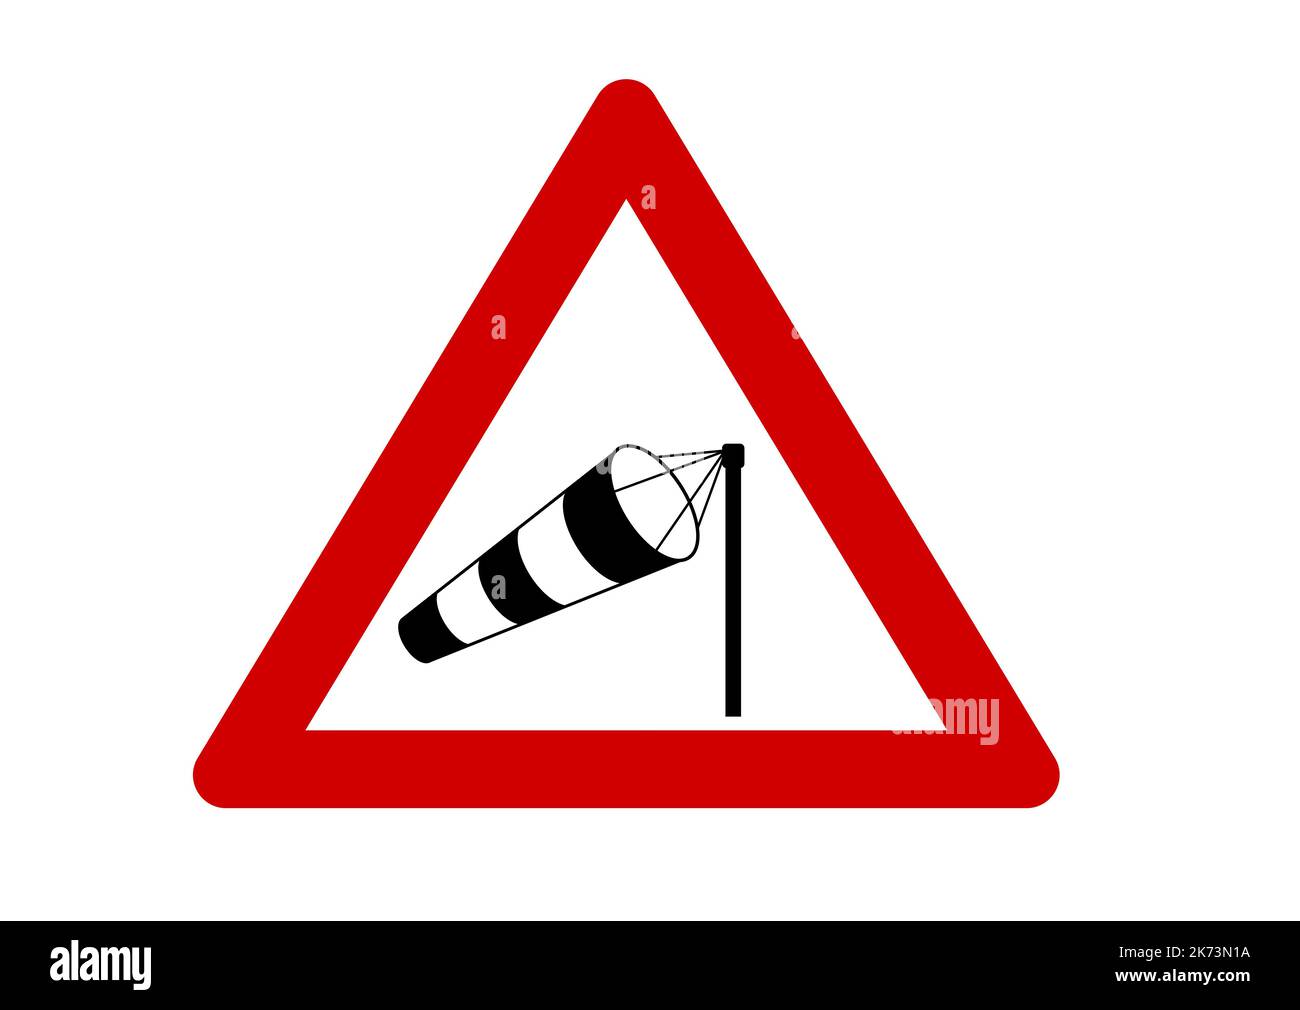 Crosswind road sign - windsock in red triangle vector illustration. Stock Vector